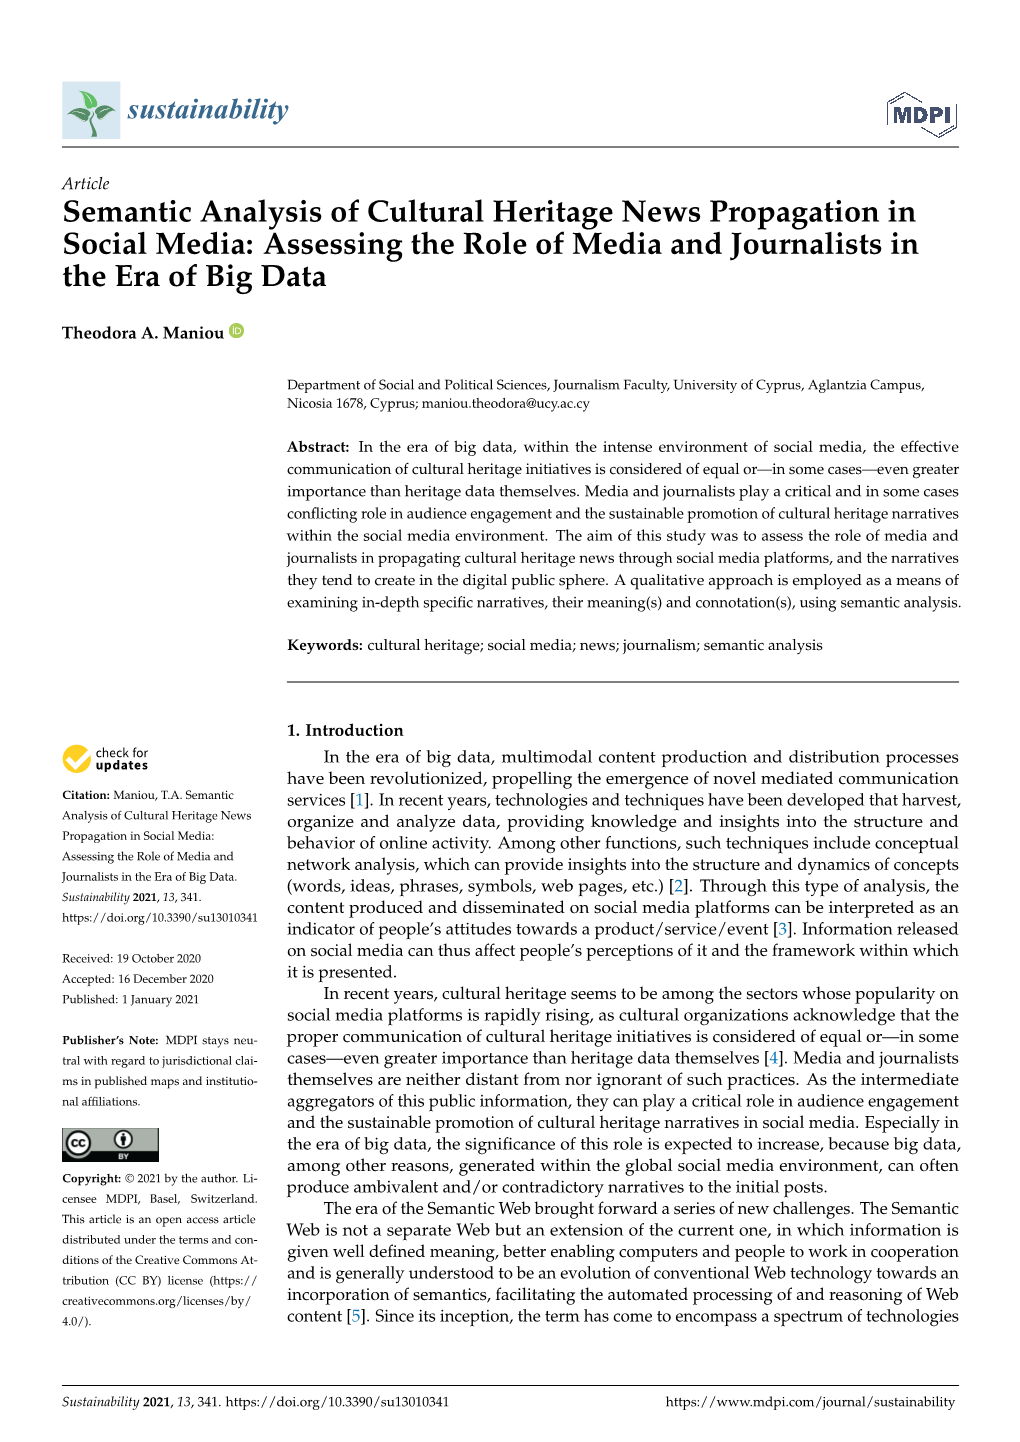 Semantic Analysis of Cultural Heritage News Propagation in Social Media: Assessing the Role of Media and Journalists in the Era of Big Data